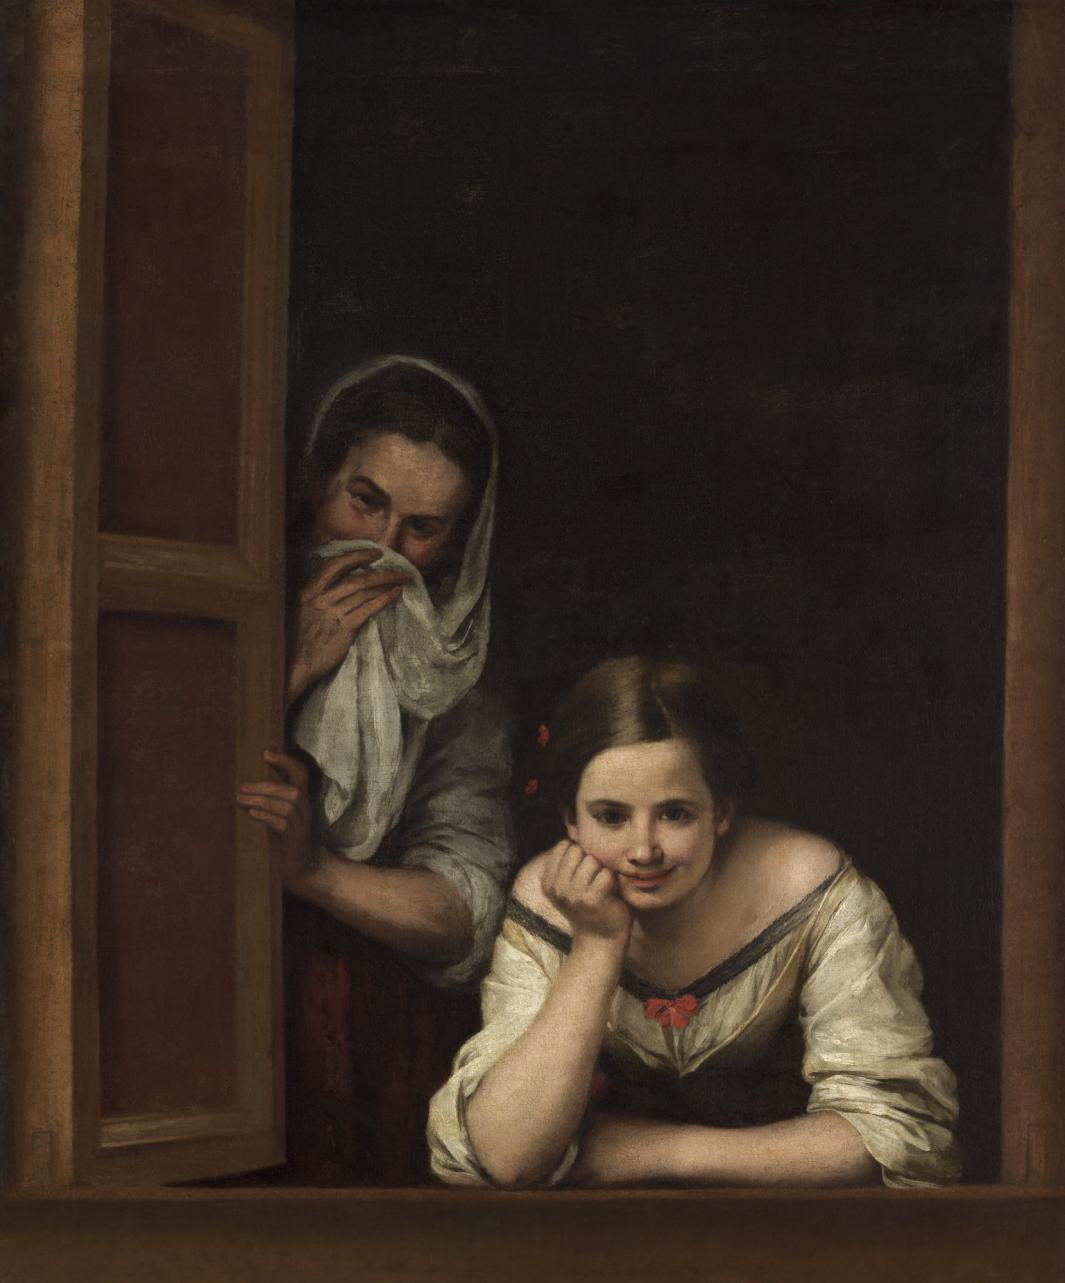 oil painting of younger woman leaning on window sill and older woman with cloth over mouth, both smiling